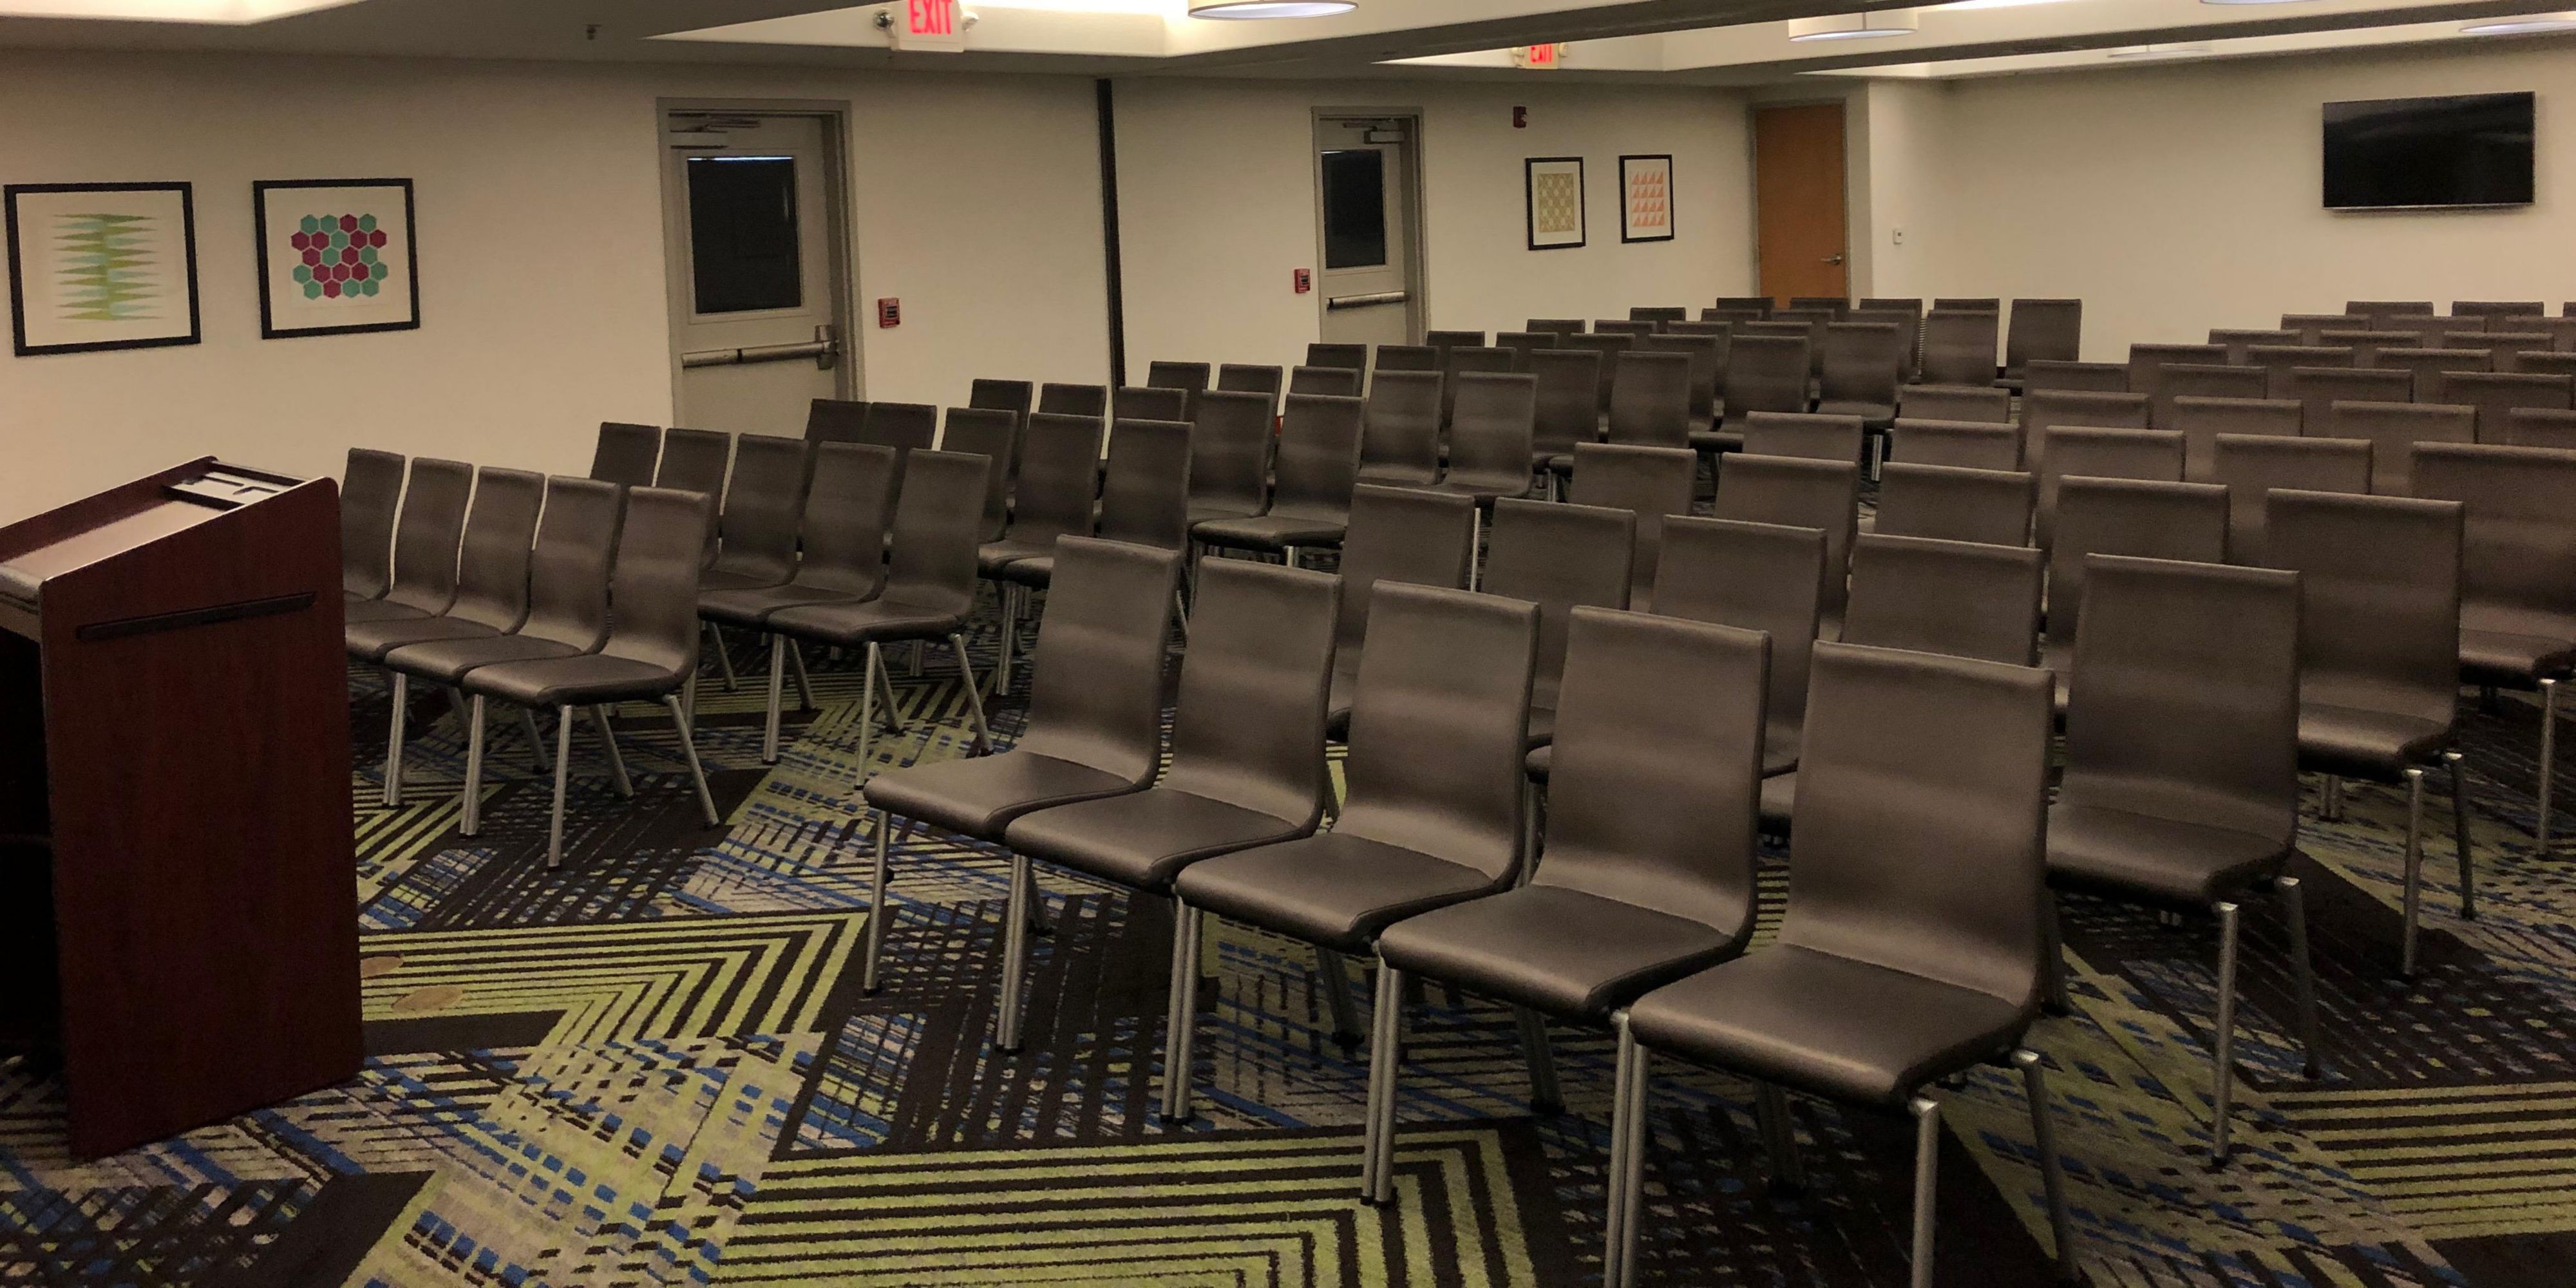 Allow us to host your next meeting. We offer three meeting rooms that include all the essentials for a perfect meeting. Take advantage of multiple room set-ups for up to 120 attendees, A/V equipment, whiteboard, Business Center, and more.